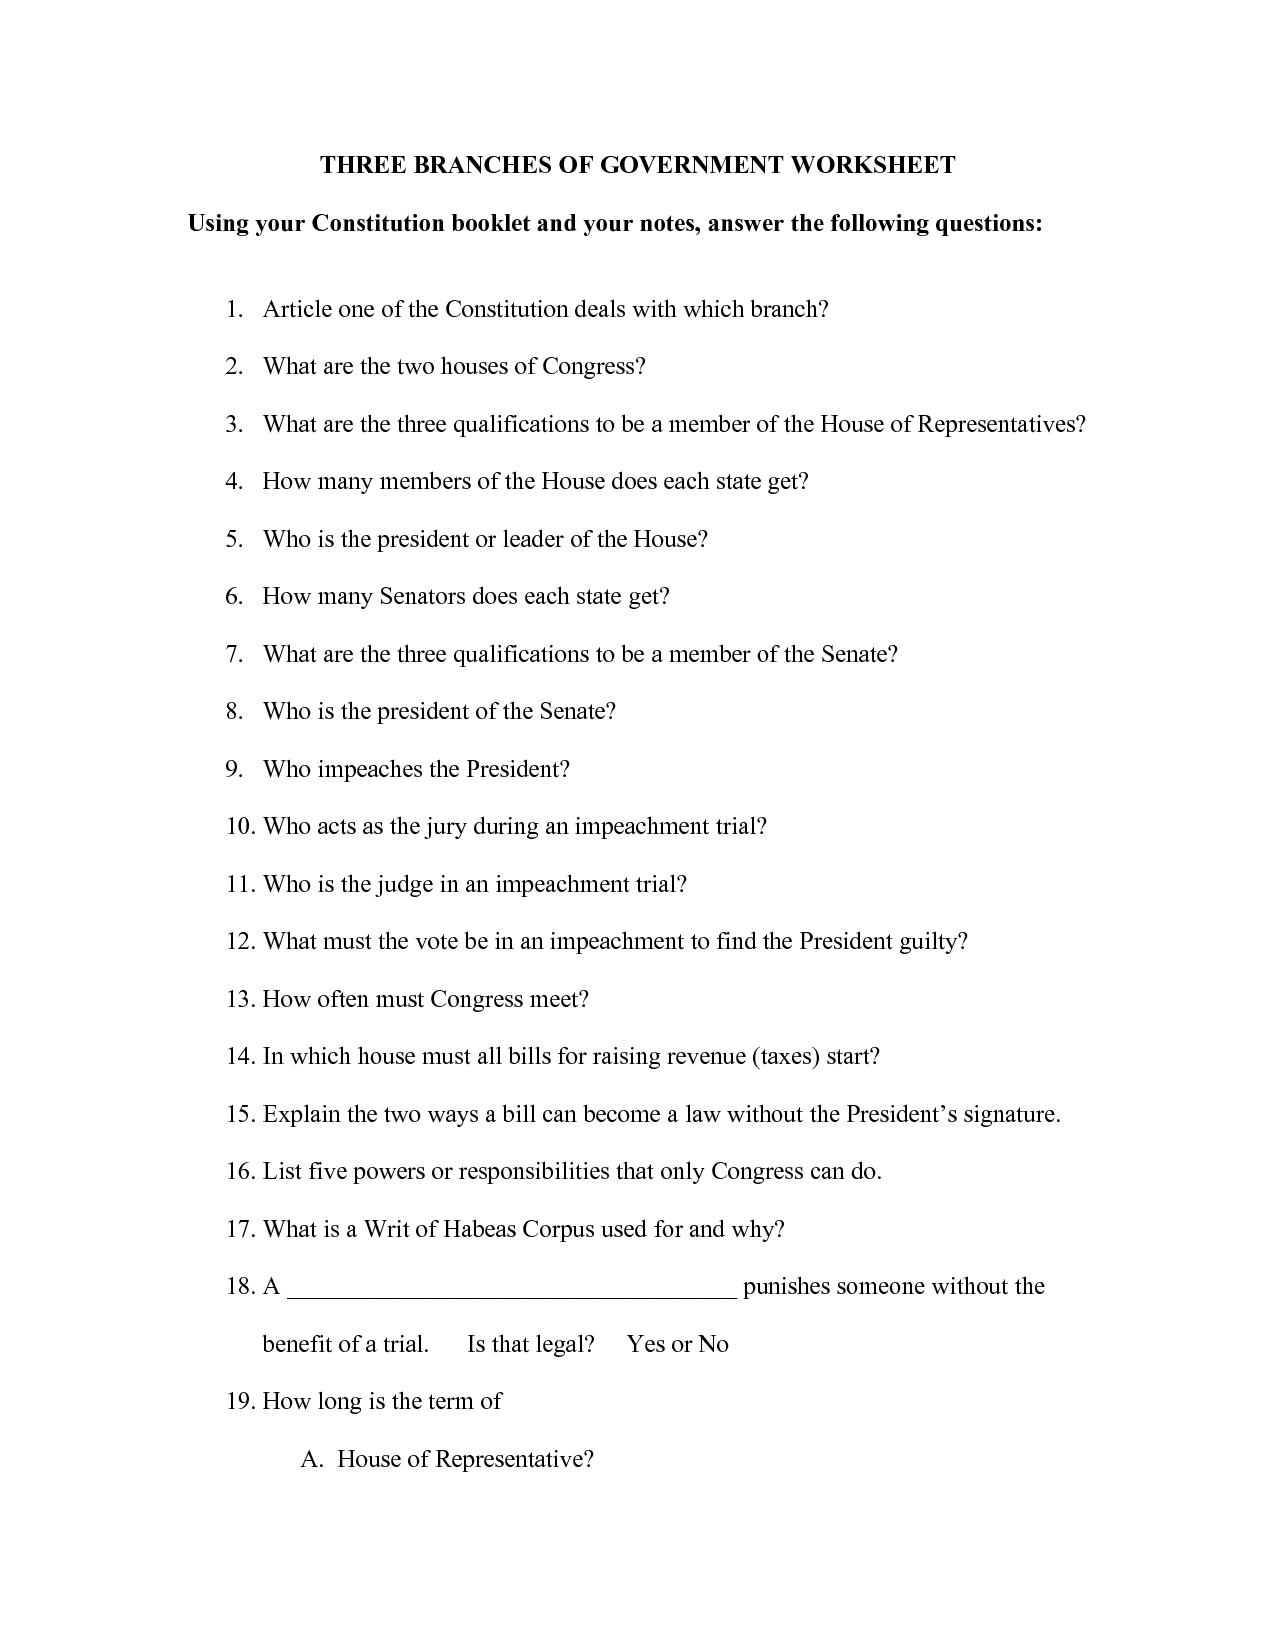 Branches of Government Worksheet.pdf